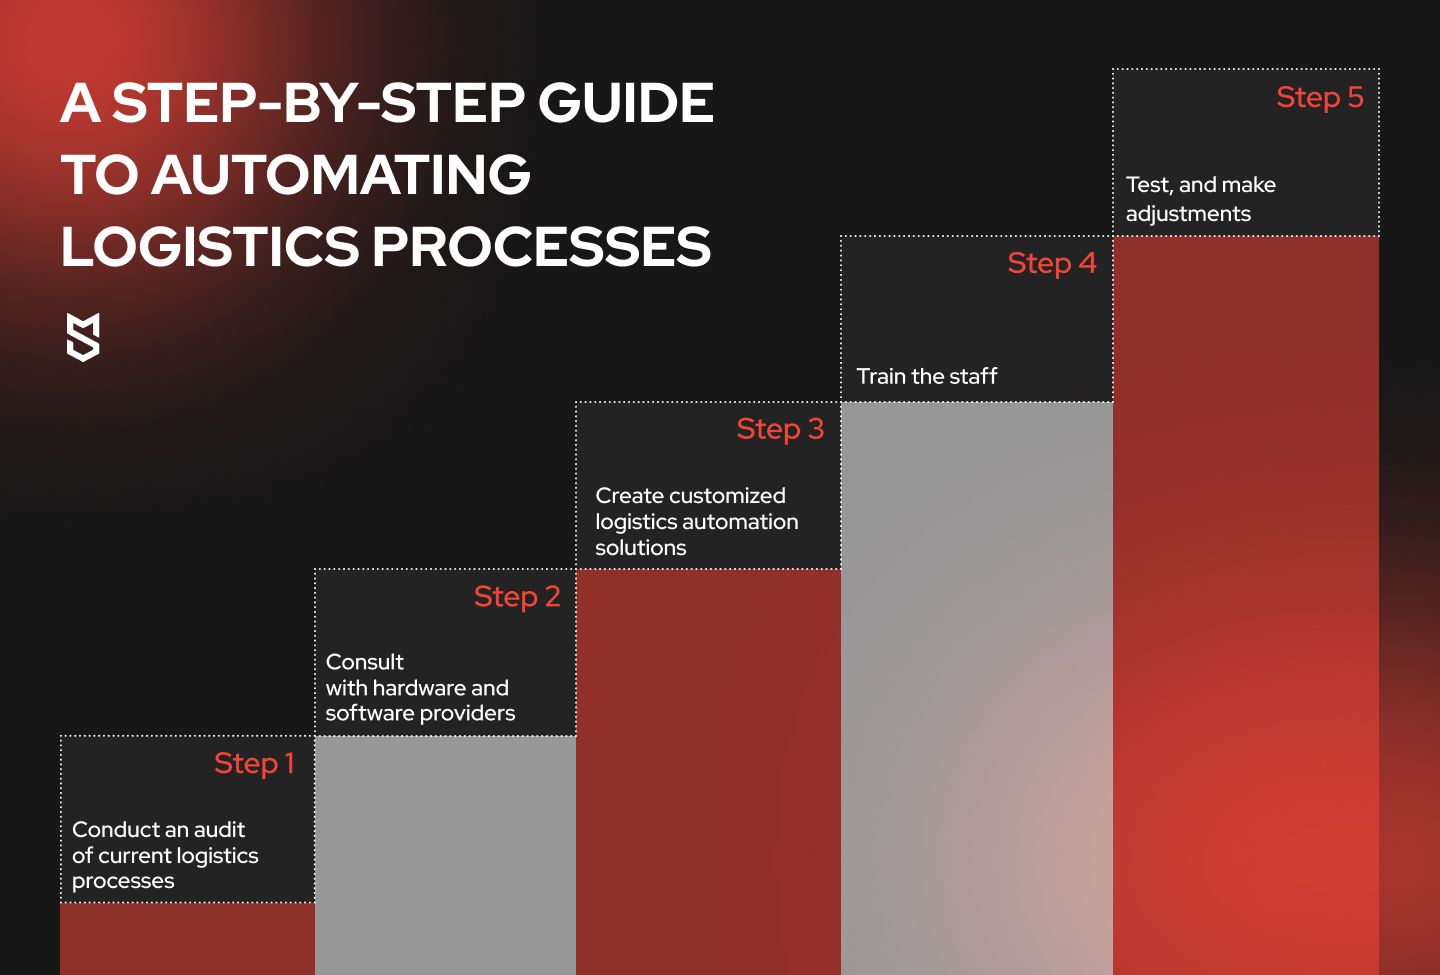 A step-by-step guide to automating logistics processes